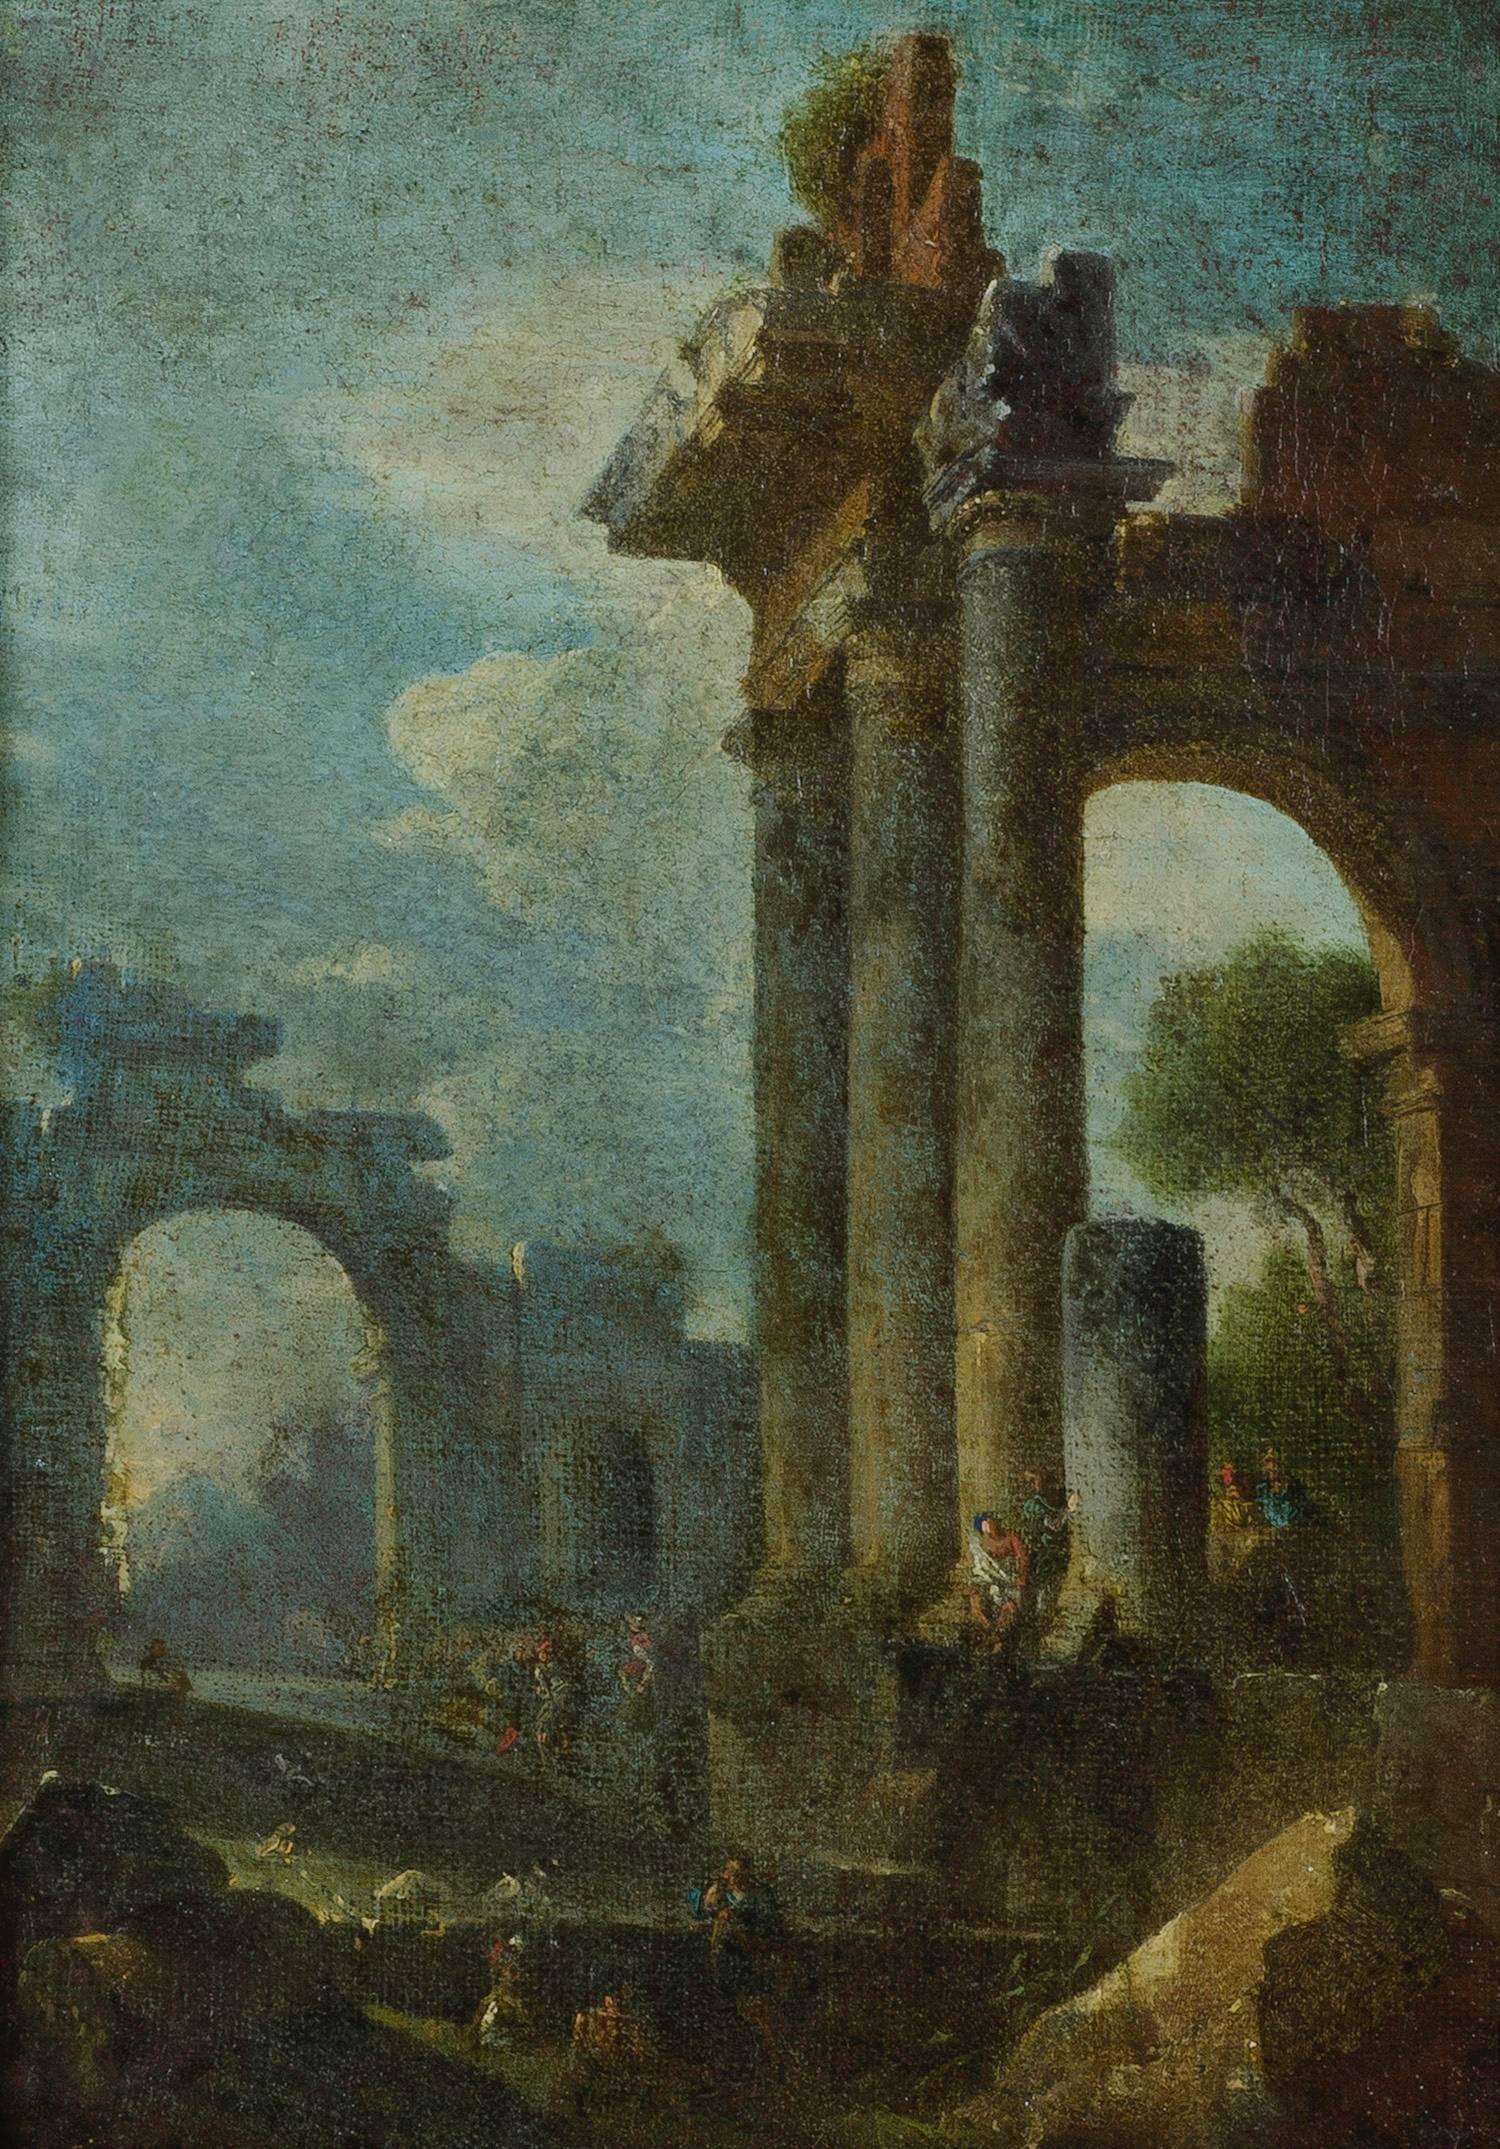 Ebonized 18th Century Italian Grand Tour Architectural Ruins Painting For Sale